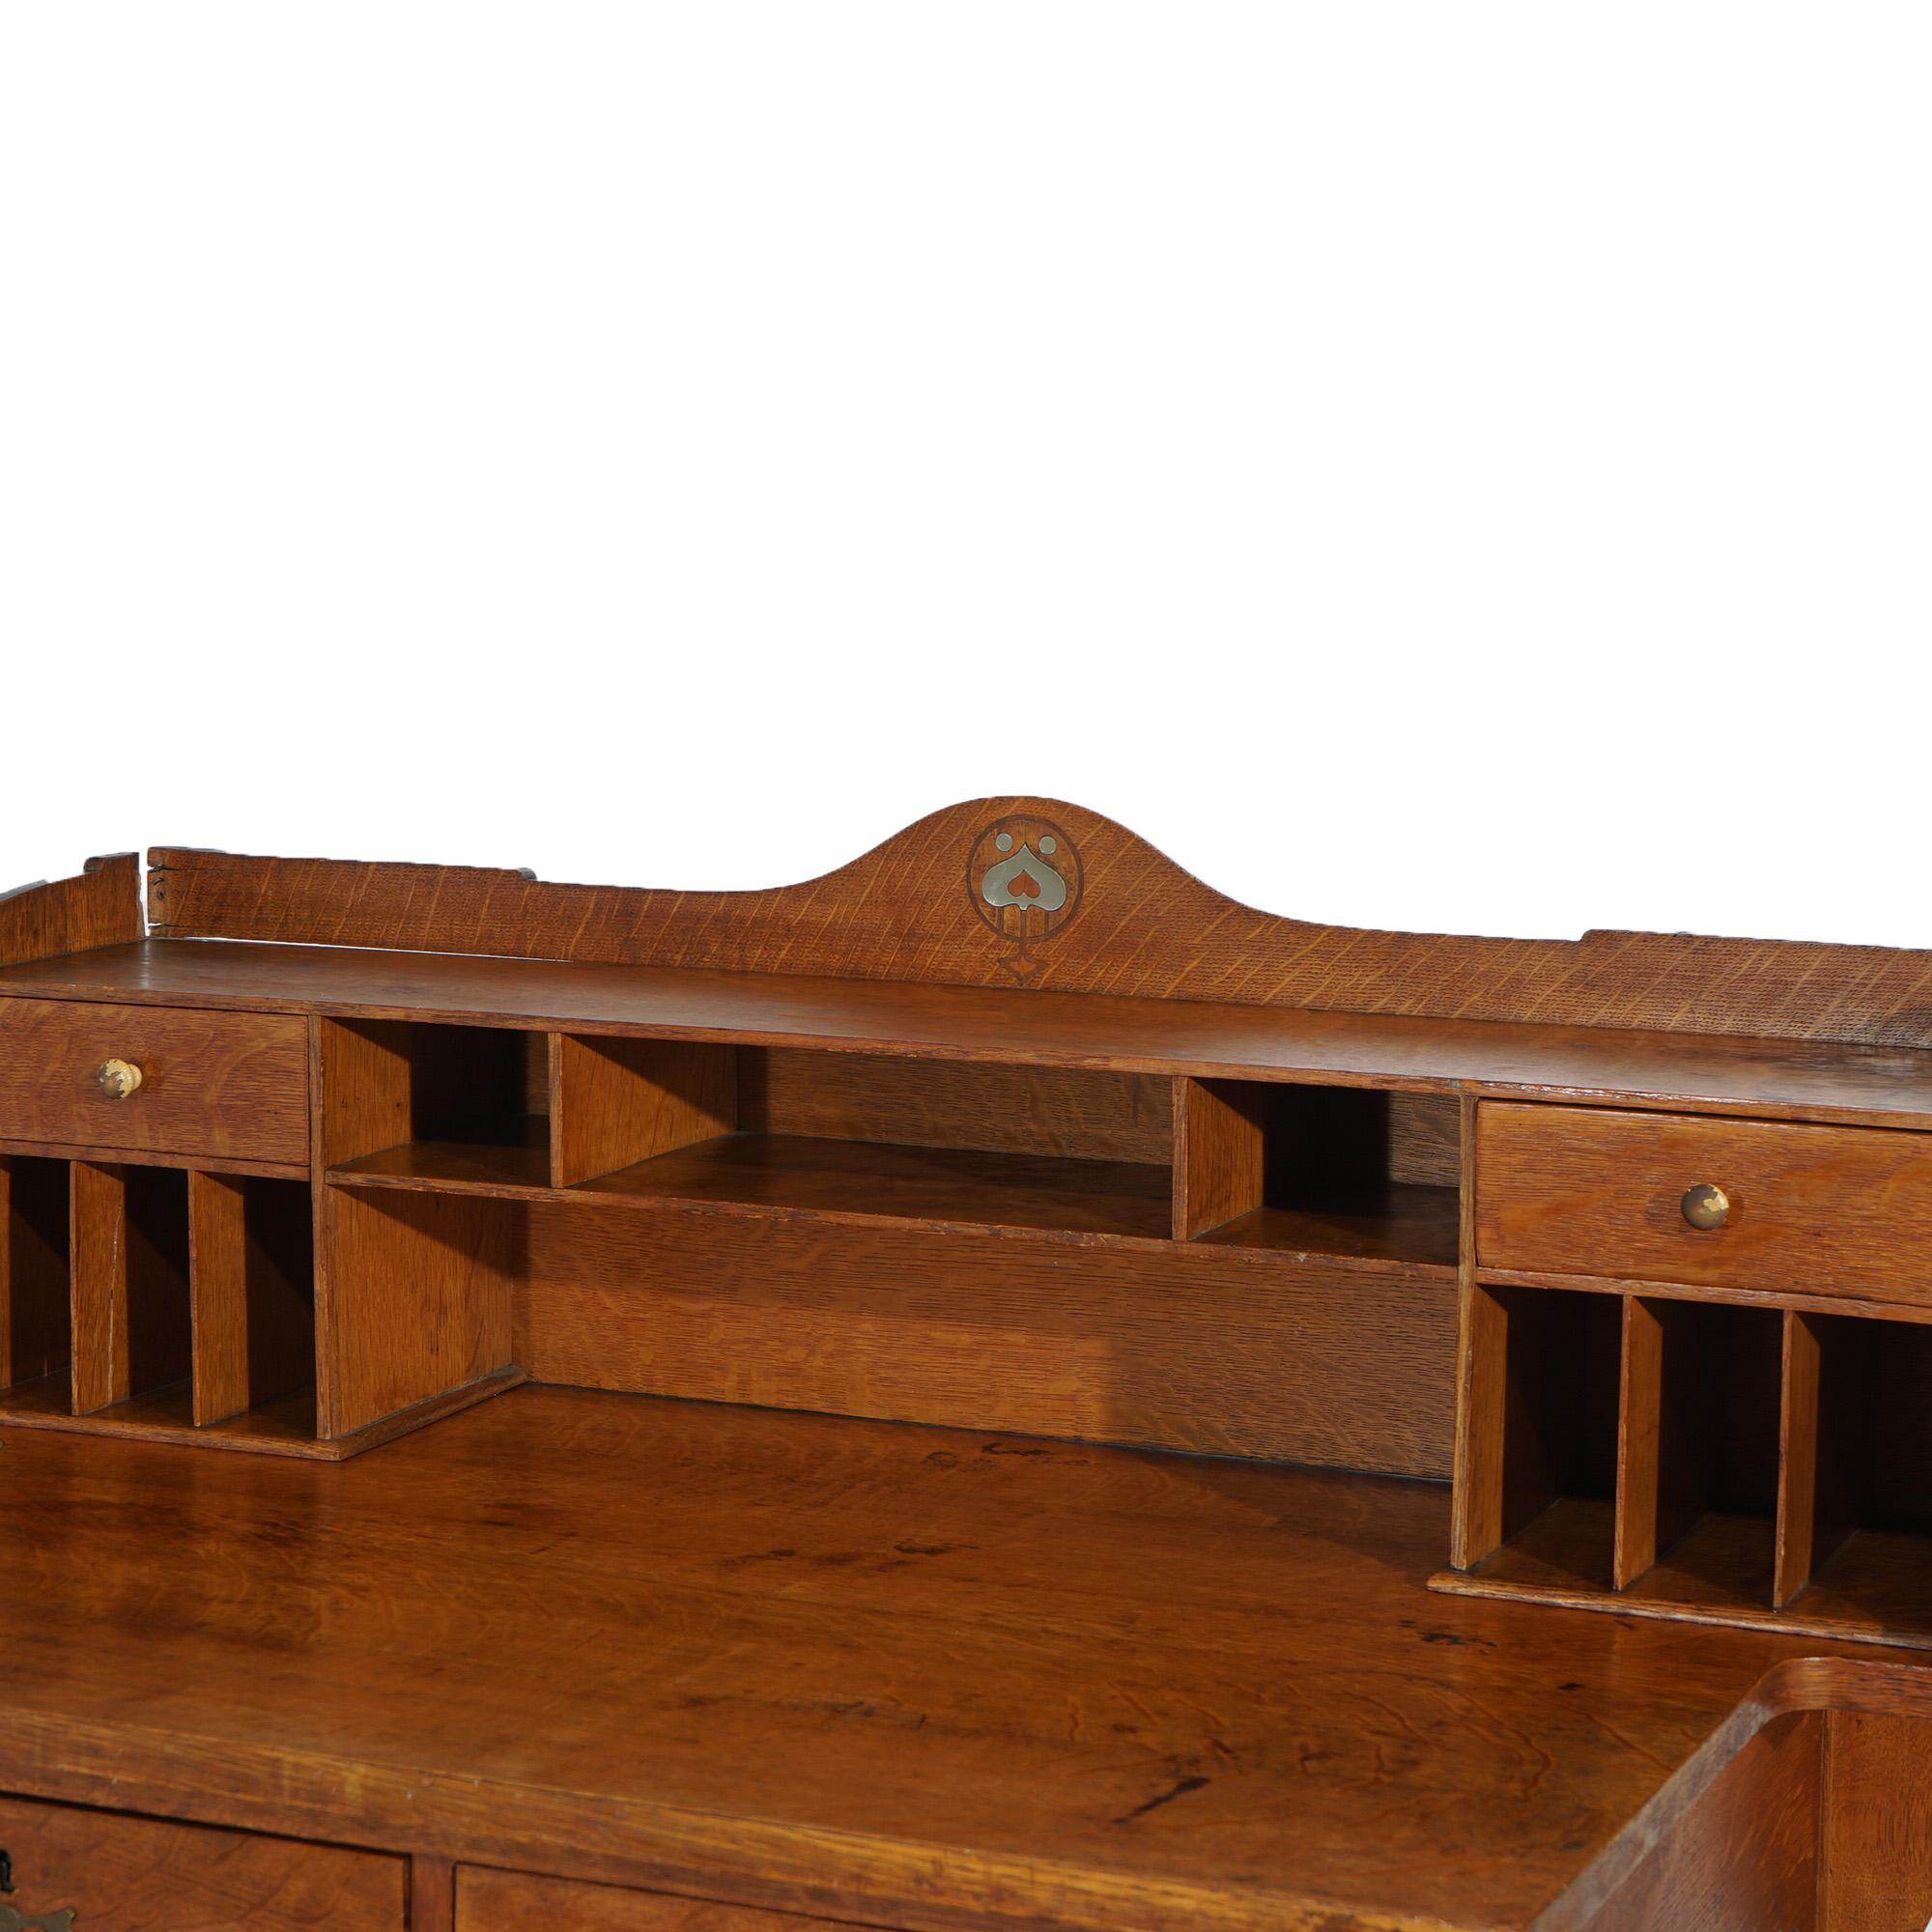 Antique Arts & Crafts English Liberty & Co. School Oak Post Card Desk c1910 In Good Condition For Sale In Big Flats, NY